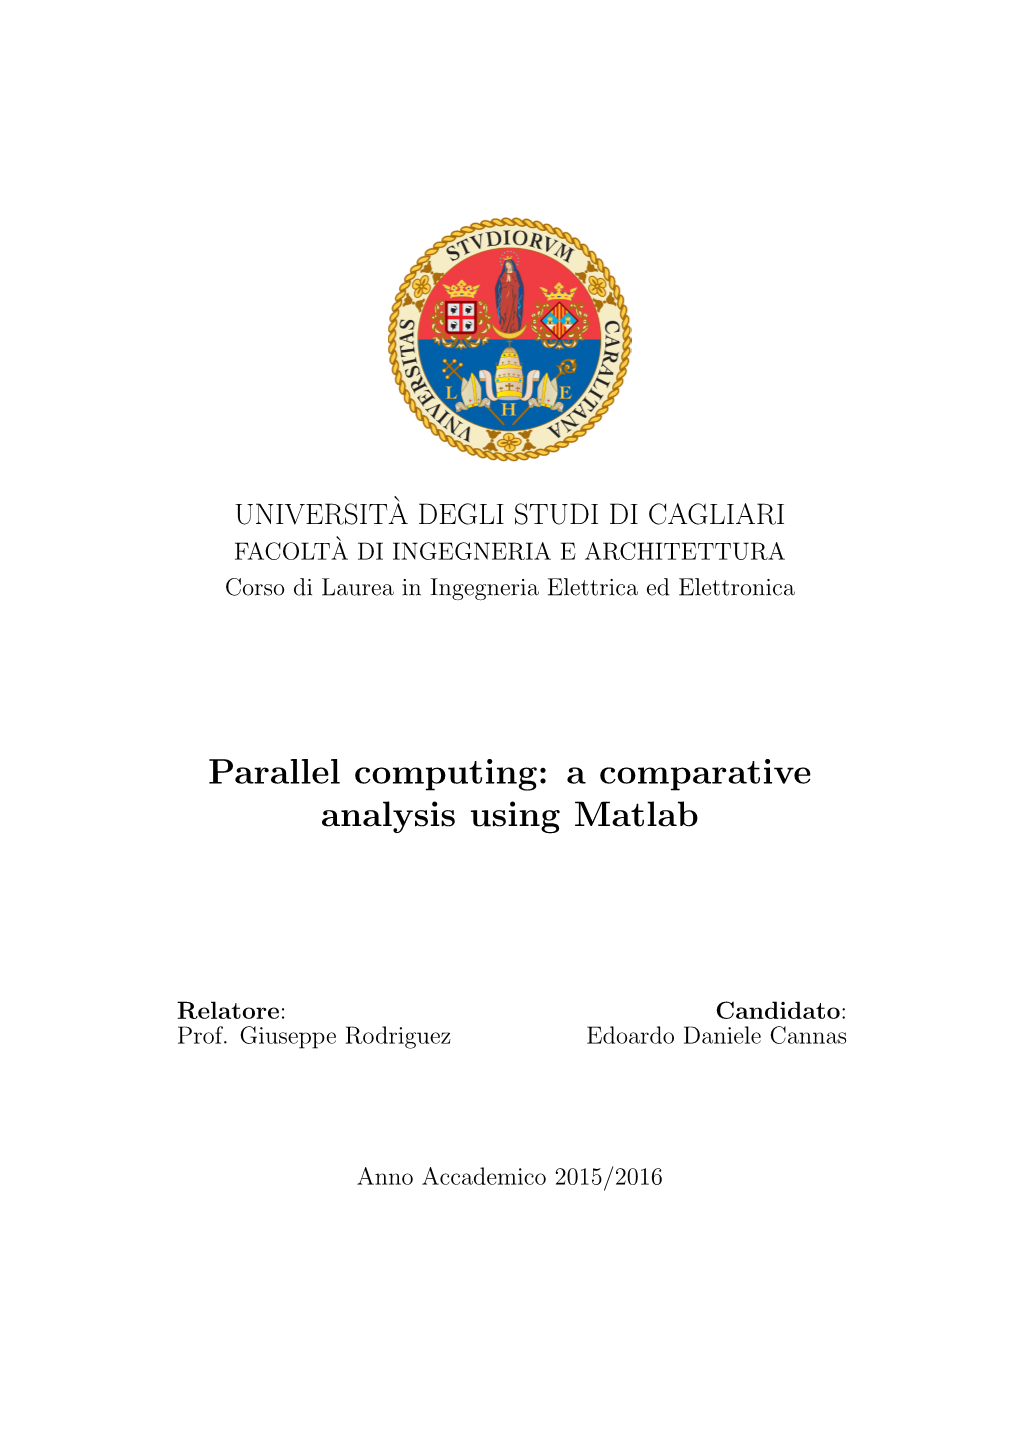 Parallel Computing: a Comparative Analysis Using Matlab